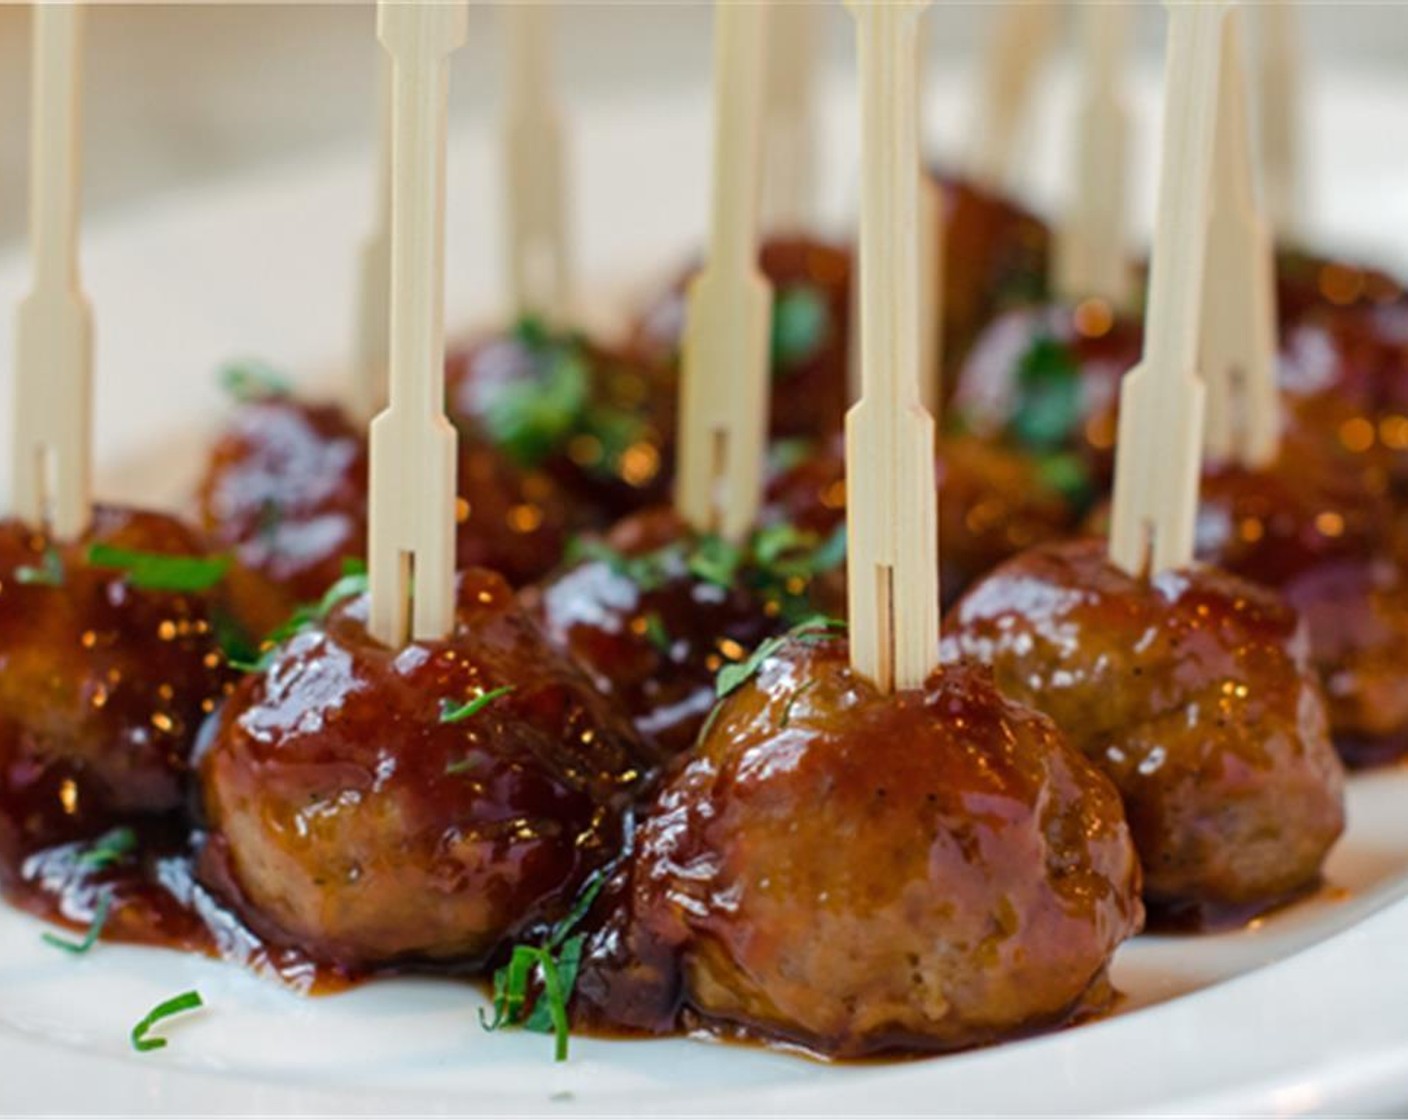 step 10 Transfer the meatballs to a serving platter, spear with toothpicks and spoon the sauce over top. Garnish with Fresh Parsley (to taste), if desired. Serve warm and enjoy!